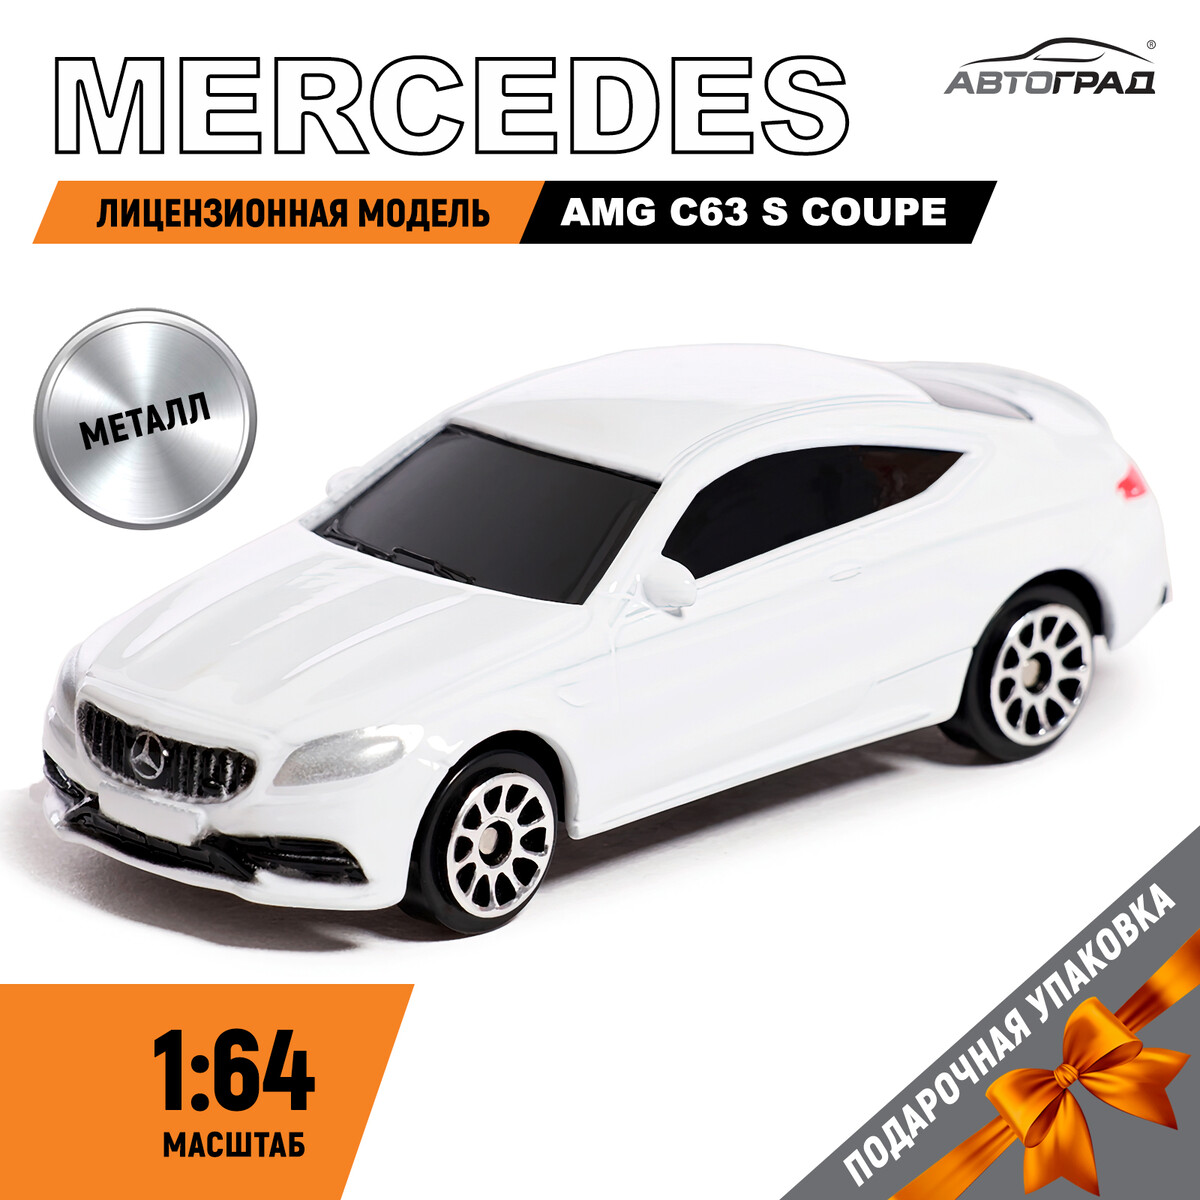   mercedes-amg c63 s coupe, 1:64,  